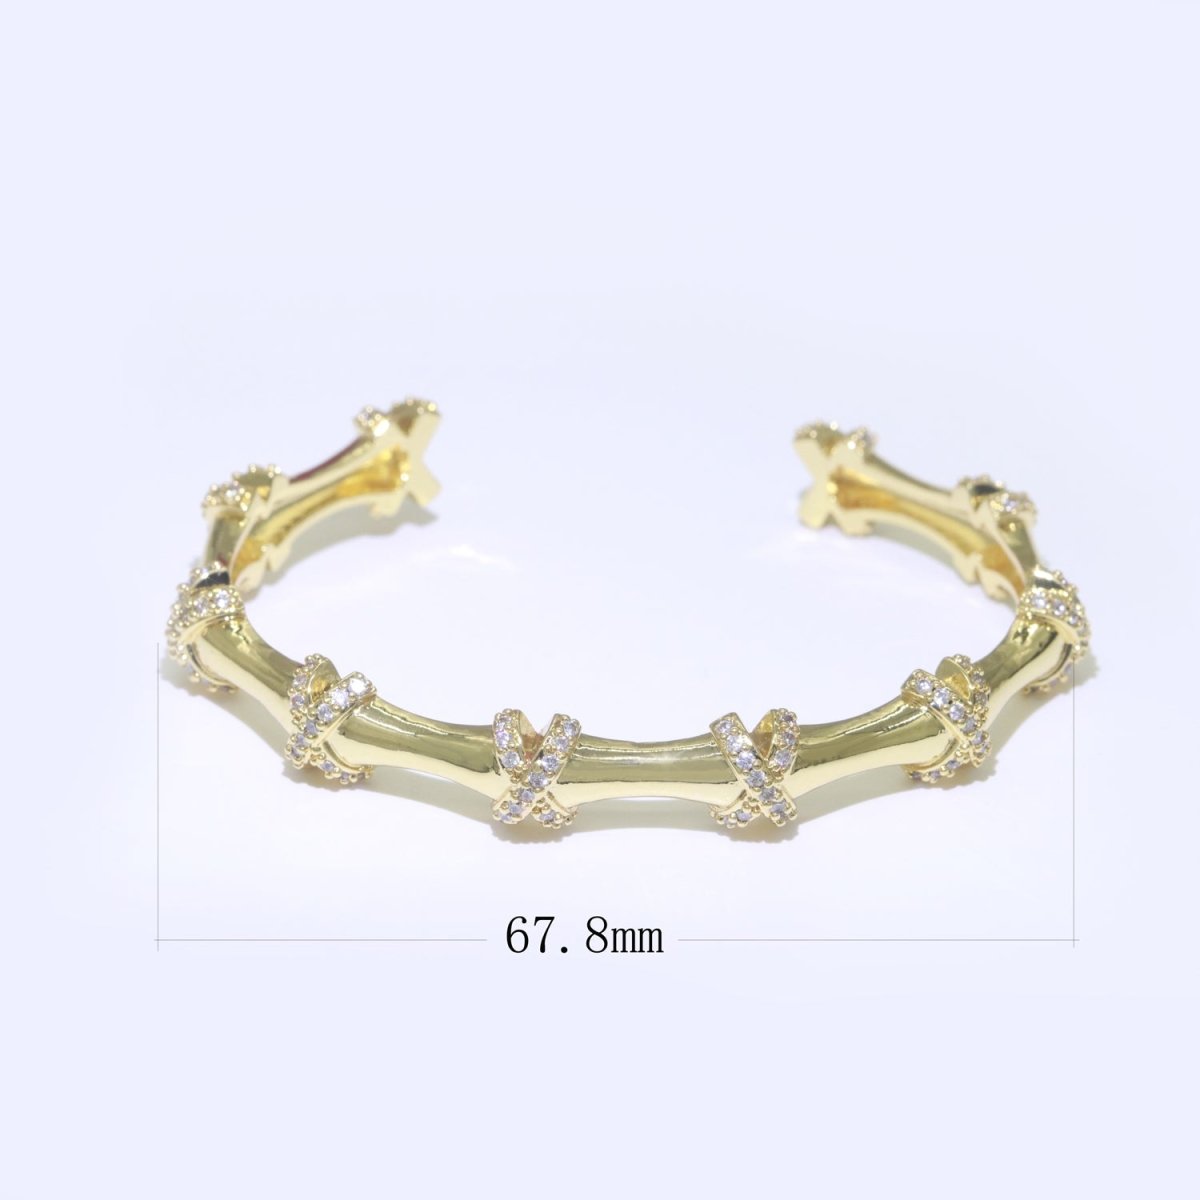 Luxury Cross Chain 24K Gold Filled CZ Open Adjustable Bangle for Woman Bracelet | WA-068 Clearance Pricing - DLUXCA